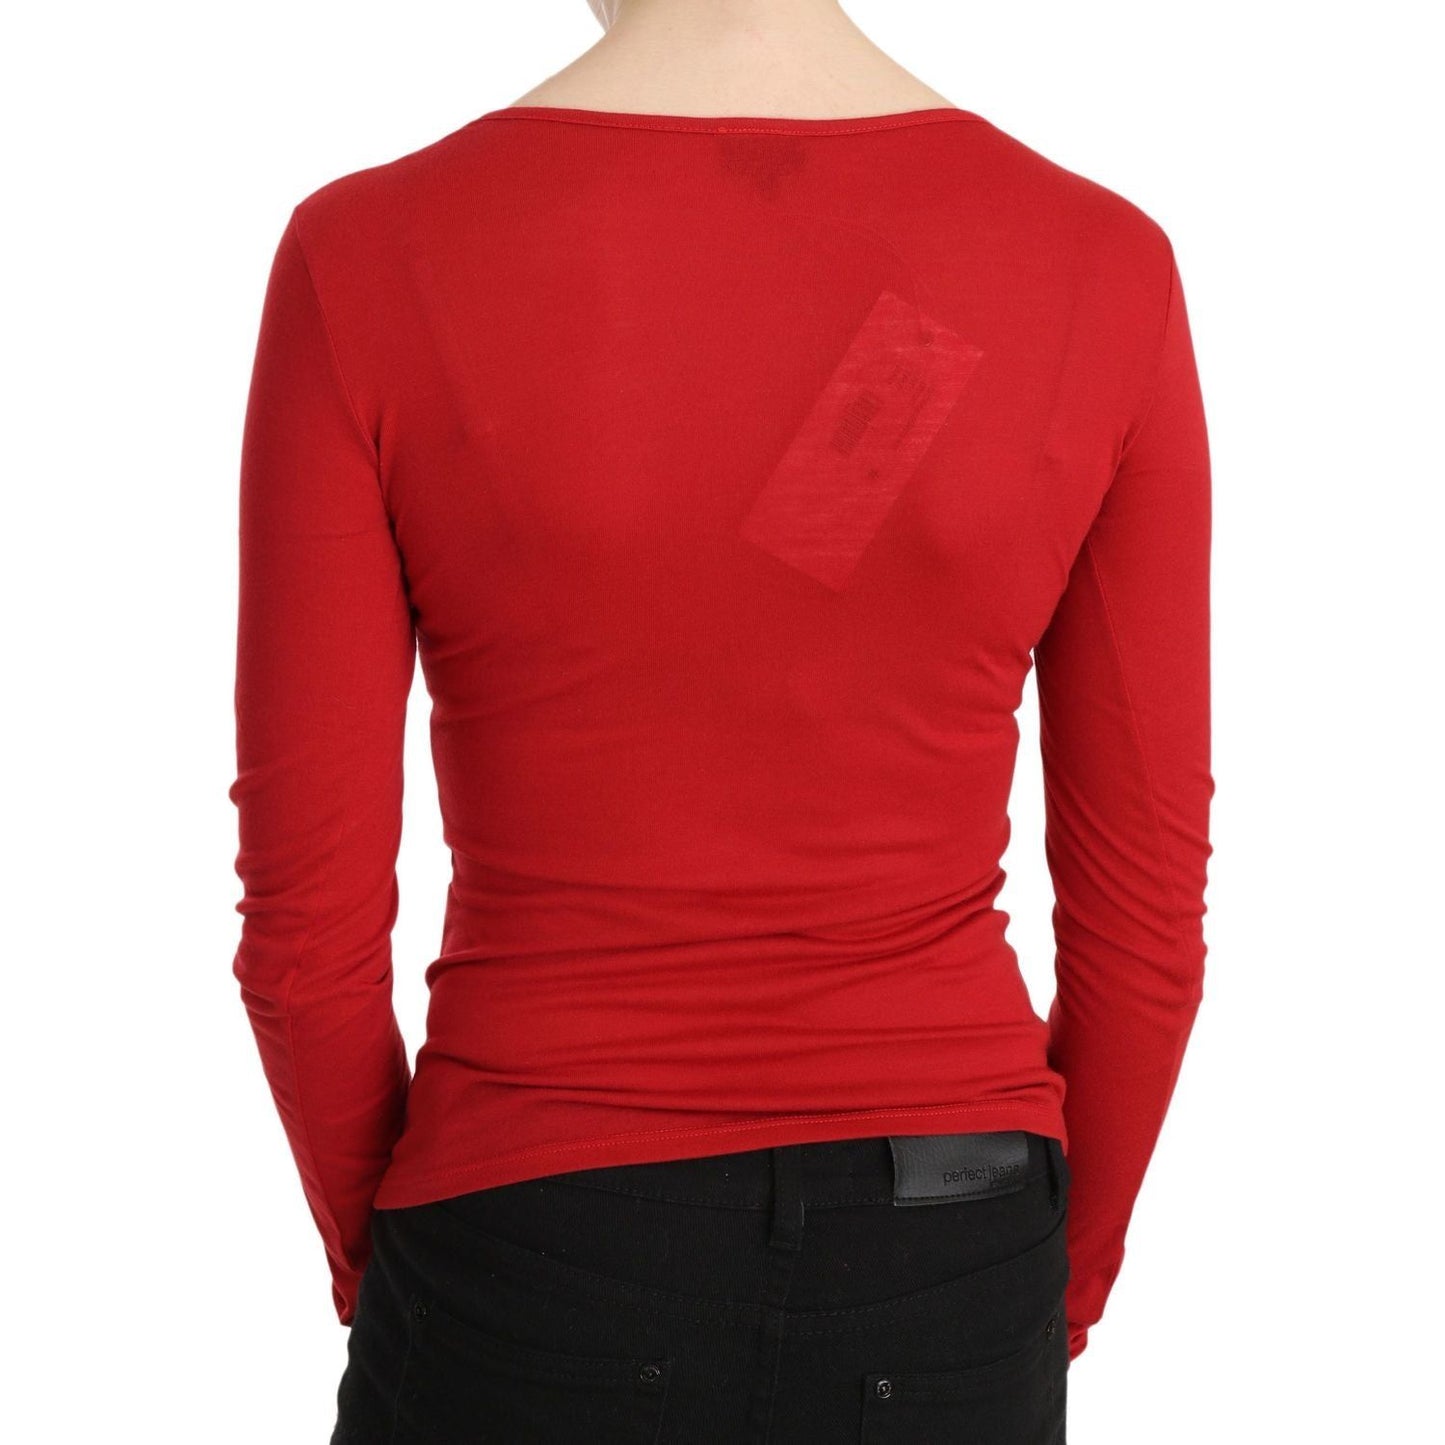 Exte Red Crystal Embellished Long Sleeve Top red-exte-crystal-embellished-long-sleeve-top-blouse